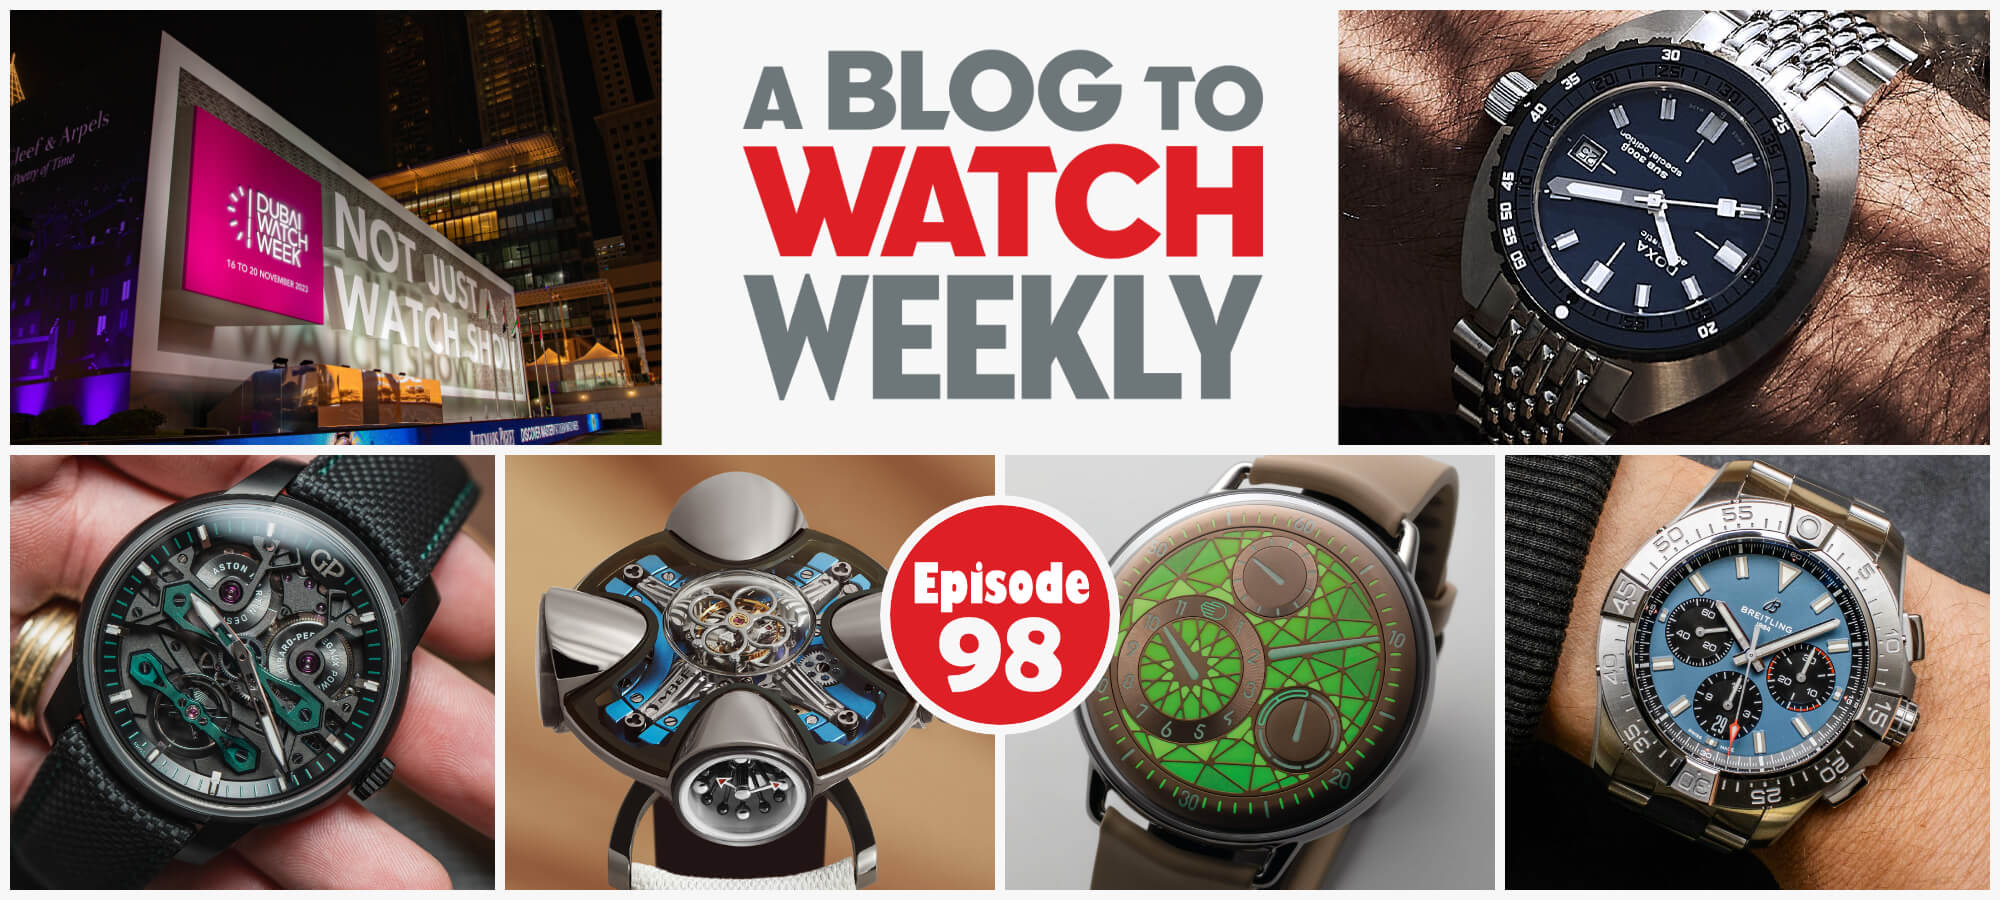 aBlogtoWatch Weekly Episode 98